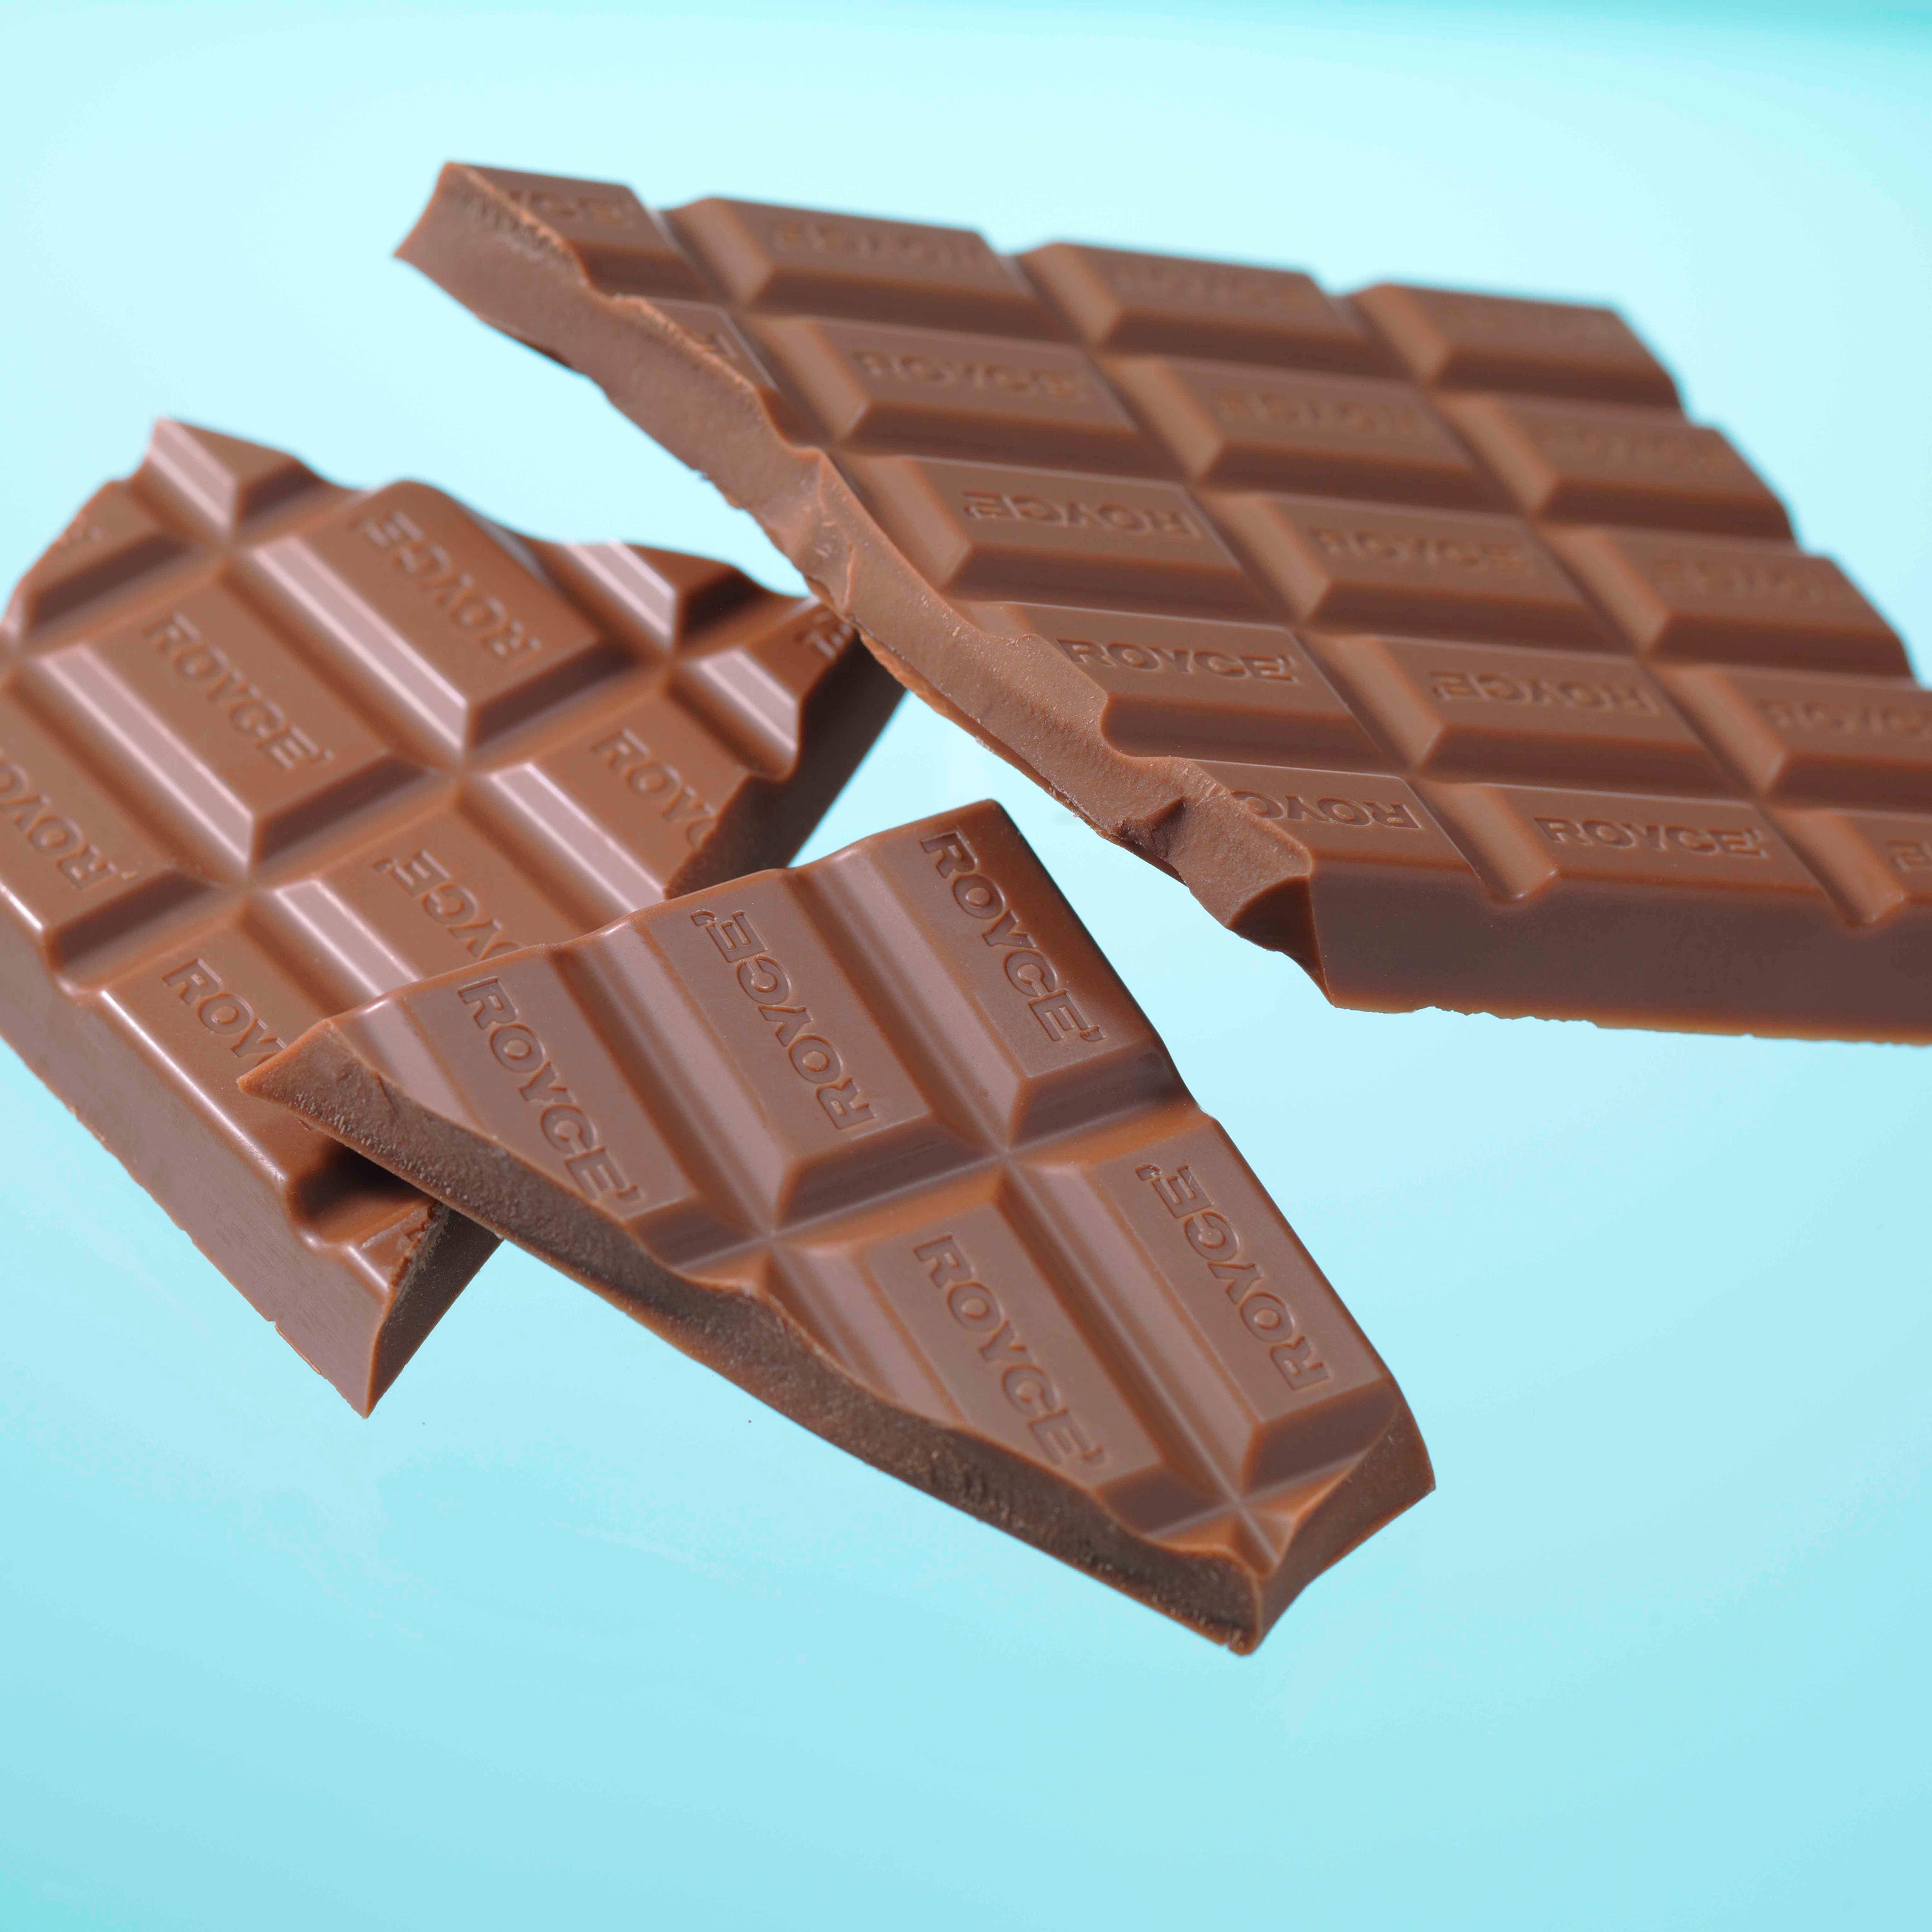 Image shows a brown chocolate bar with blue background.